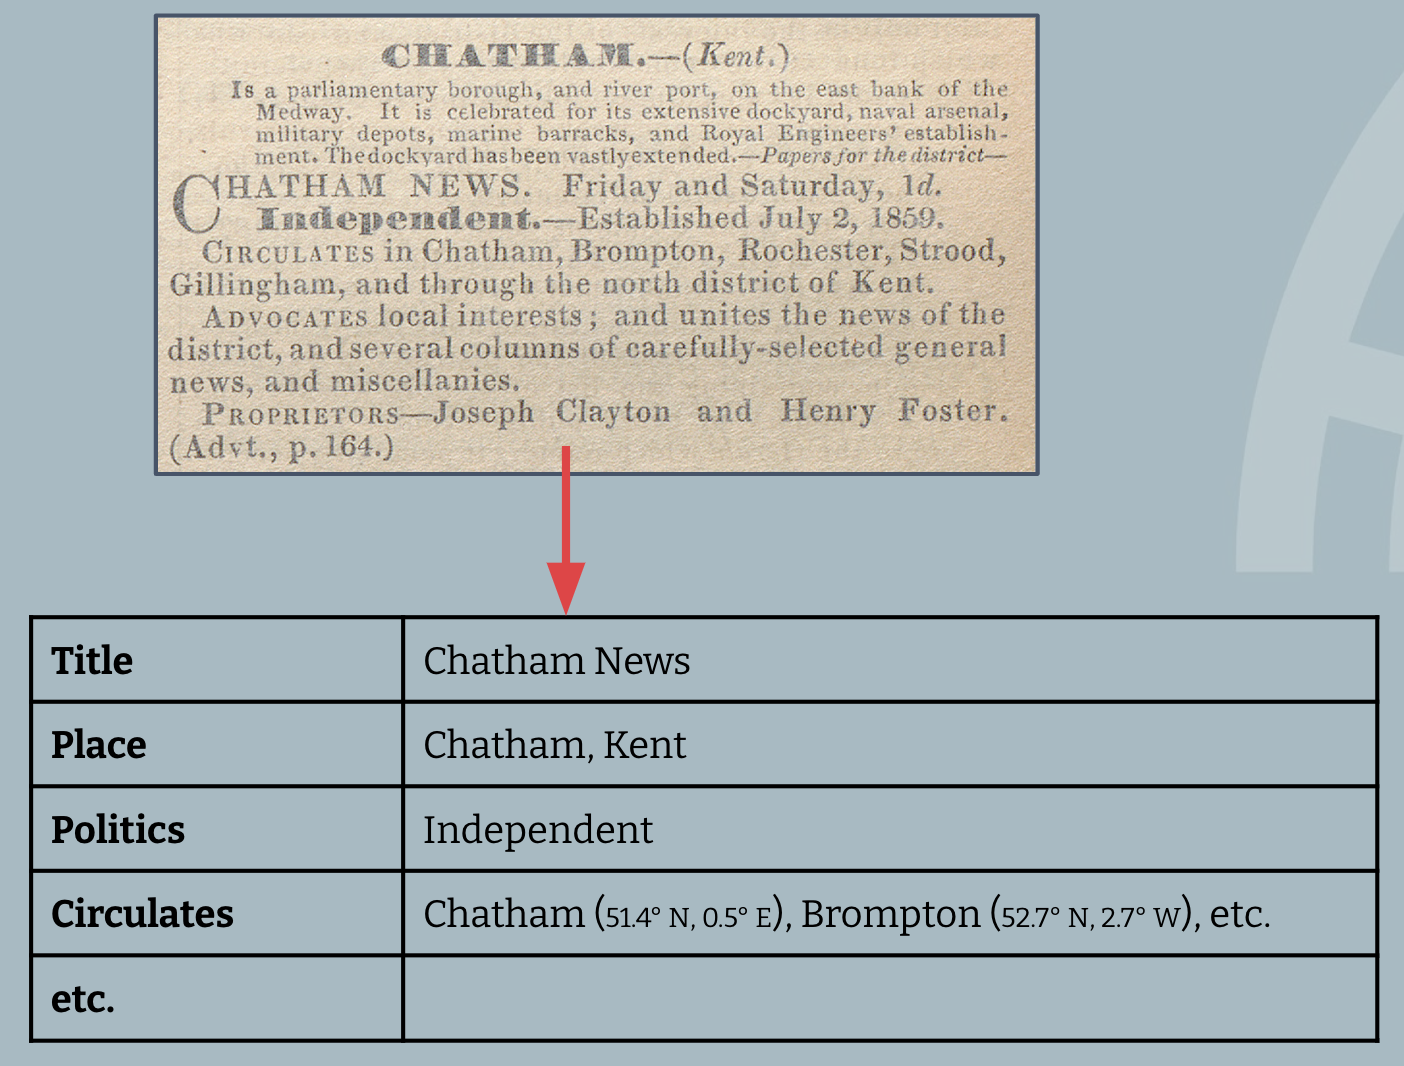 Image of the Chatham entry from above with a table of structured information - title, place, politics, circulates, etc.